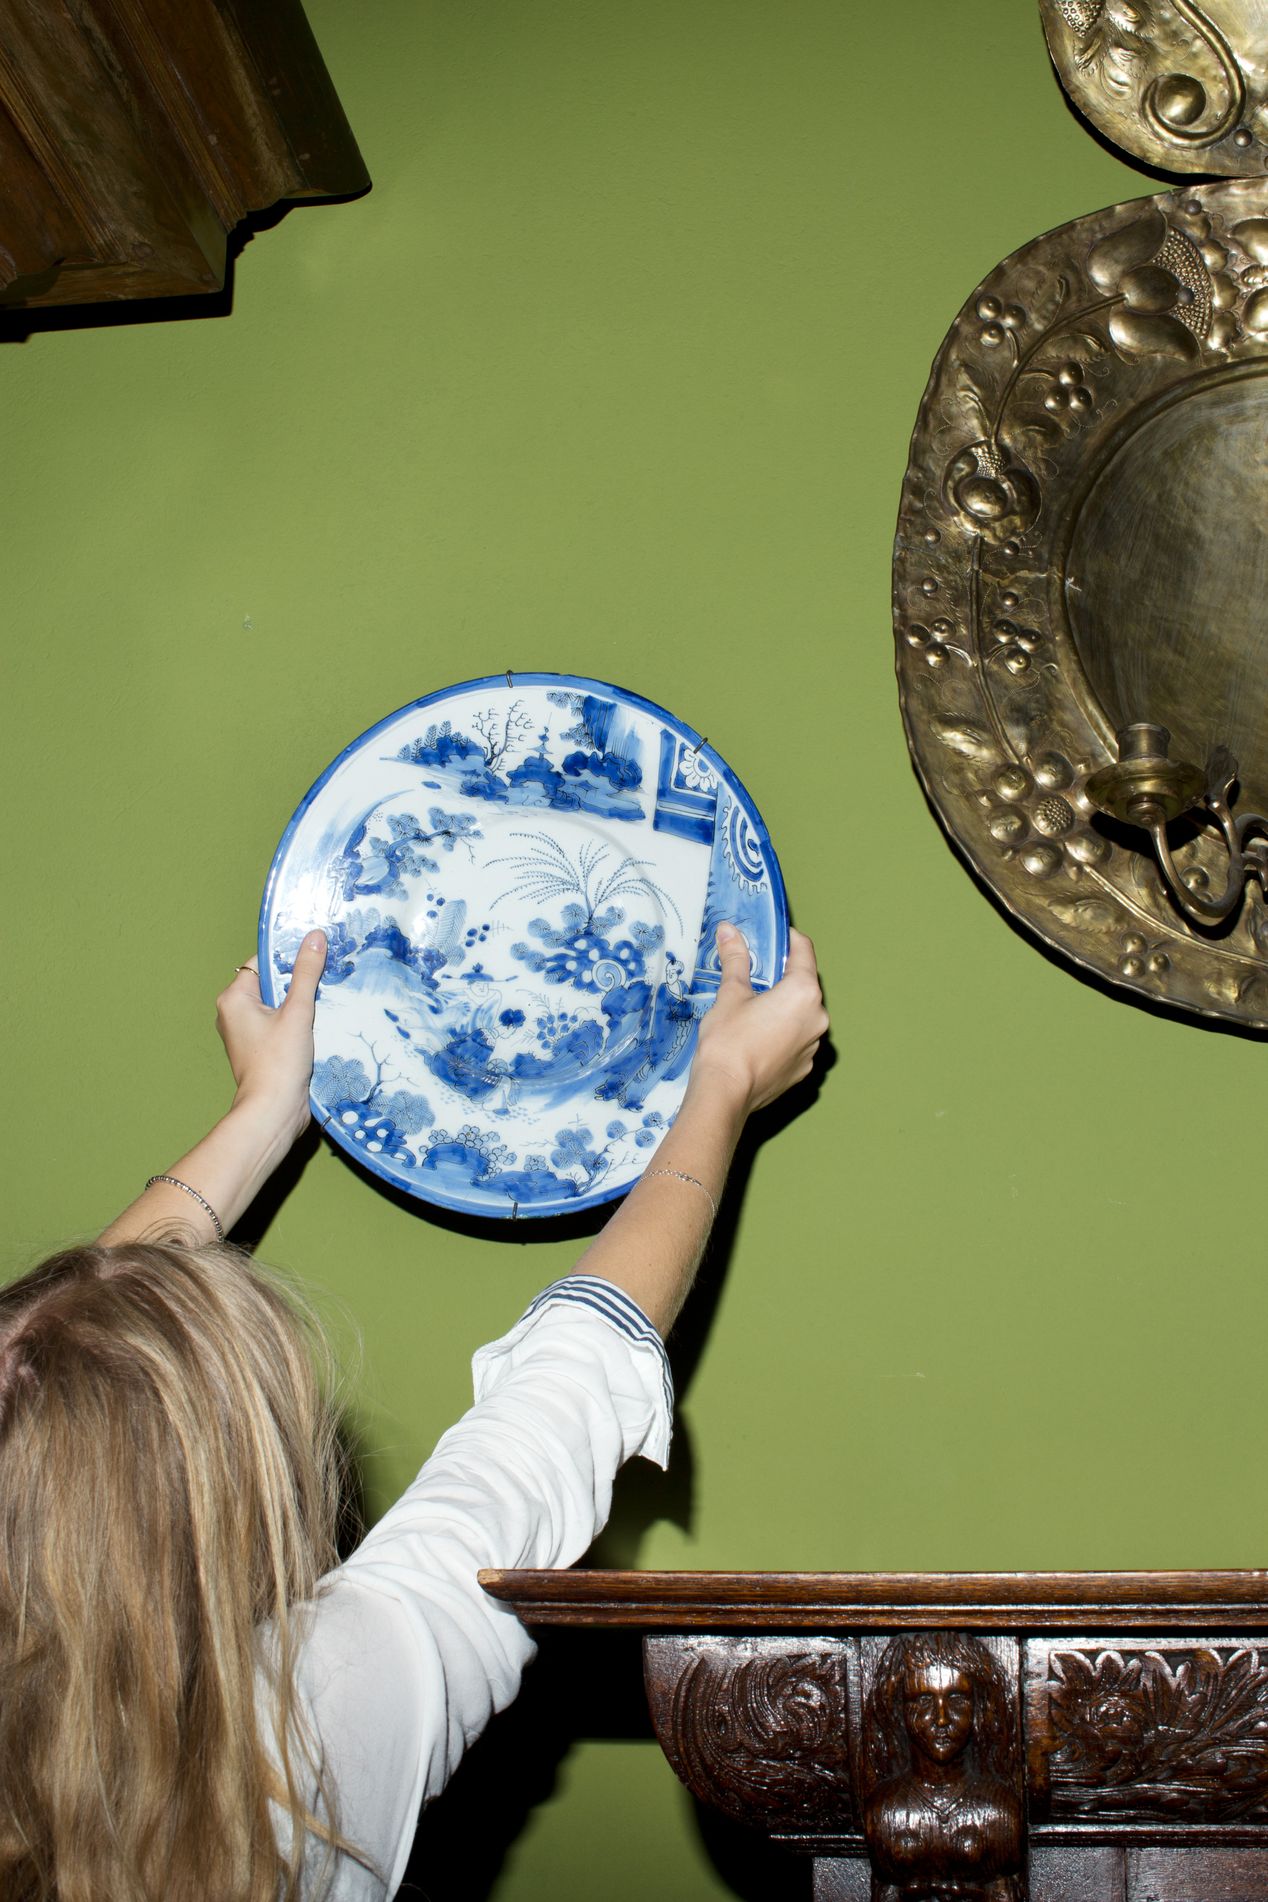 A woman holding a porcelain plate against a green wall, fine art photography, Ilona Szwarc, contemporary Los Angeles artist.